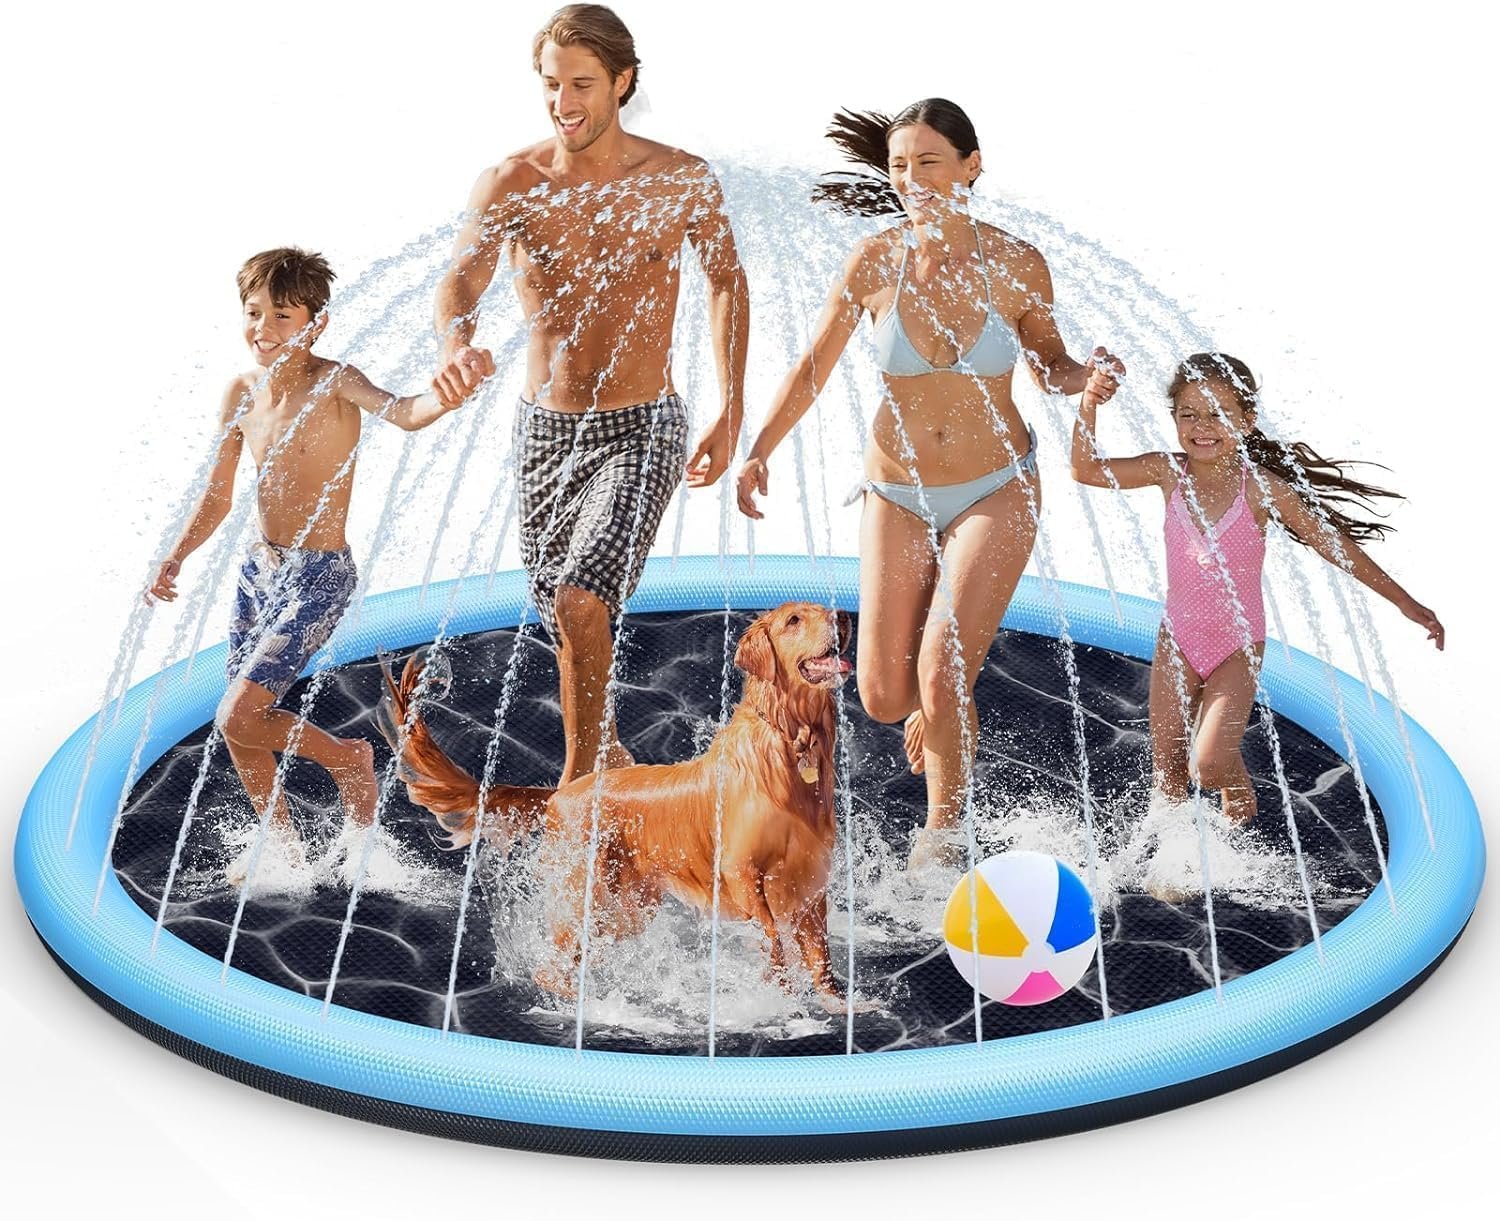 Ultimate Fun: 87" Splash Pad Sprinkler for Kids & Dogs - Non-Slip Play Mat, Perfect Summer Toy & Parent-Kids Game .